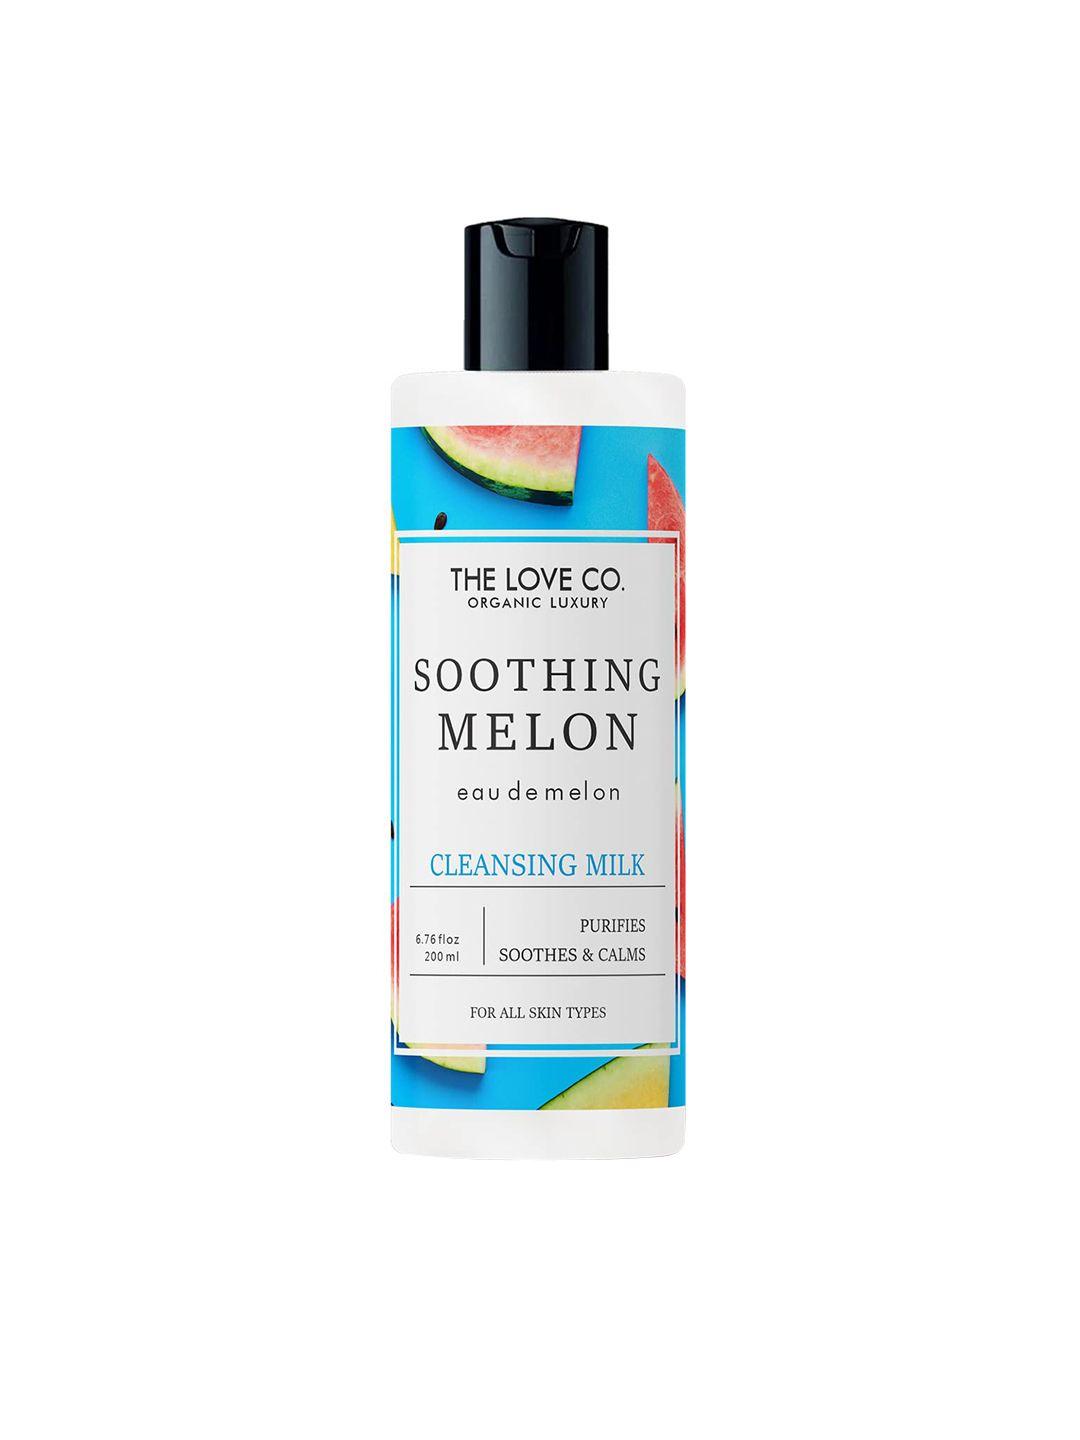 the love co. melon cleansing milk face cleanser & makeup remover 200ml